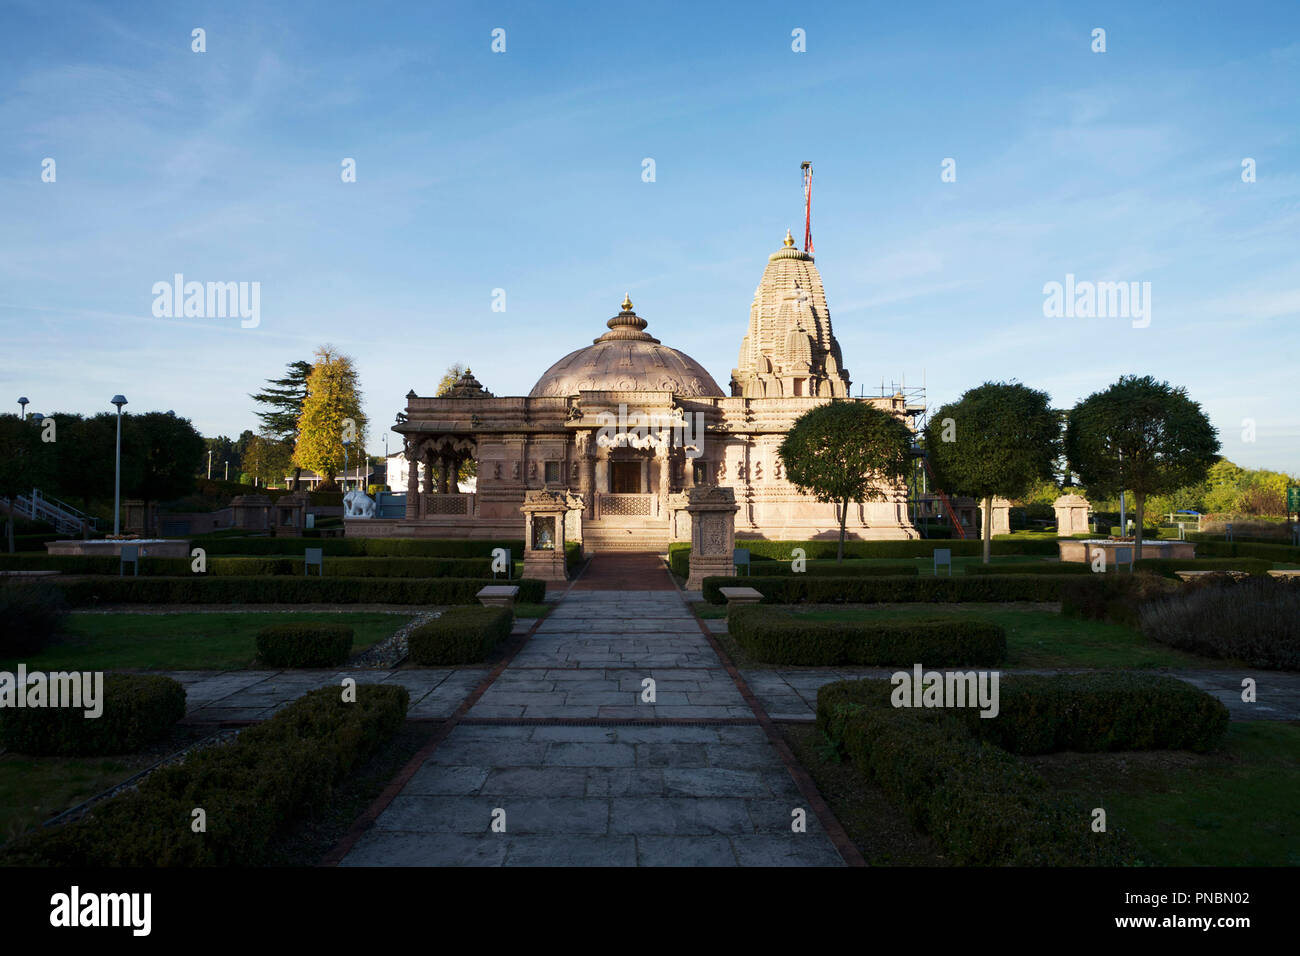 Indian temple: The Oshwal Temple, England, UK. Stock Photo